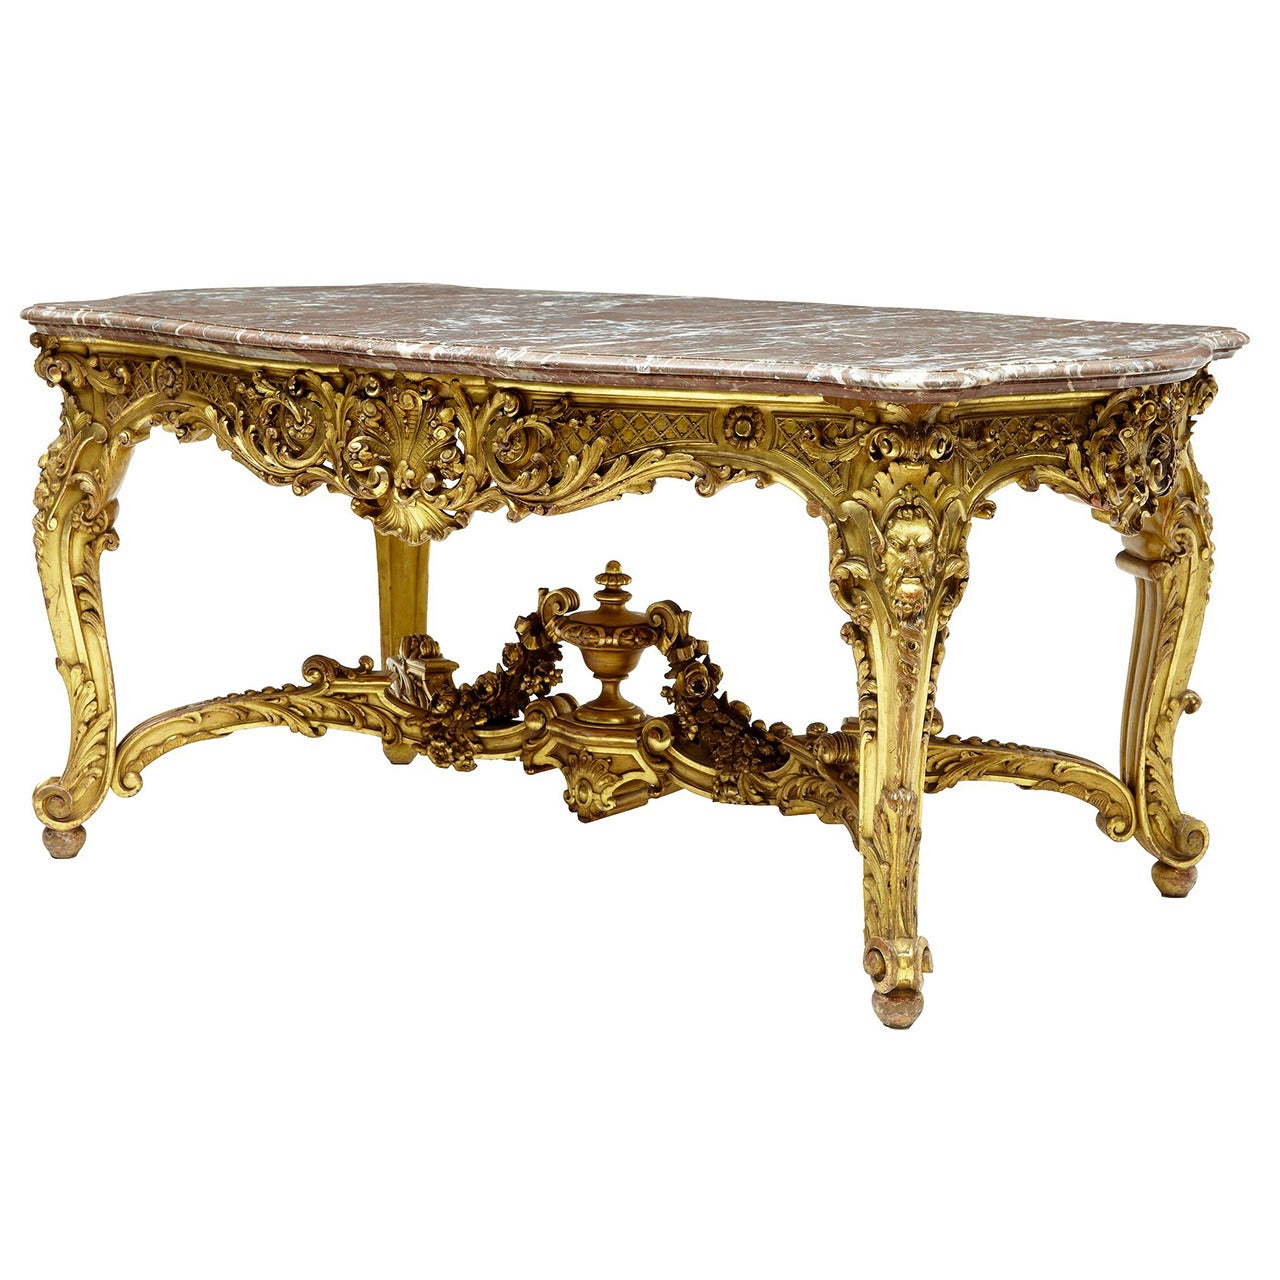 Stunning 19th Century French Carved Wood Gilt Baroque Center Table